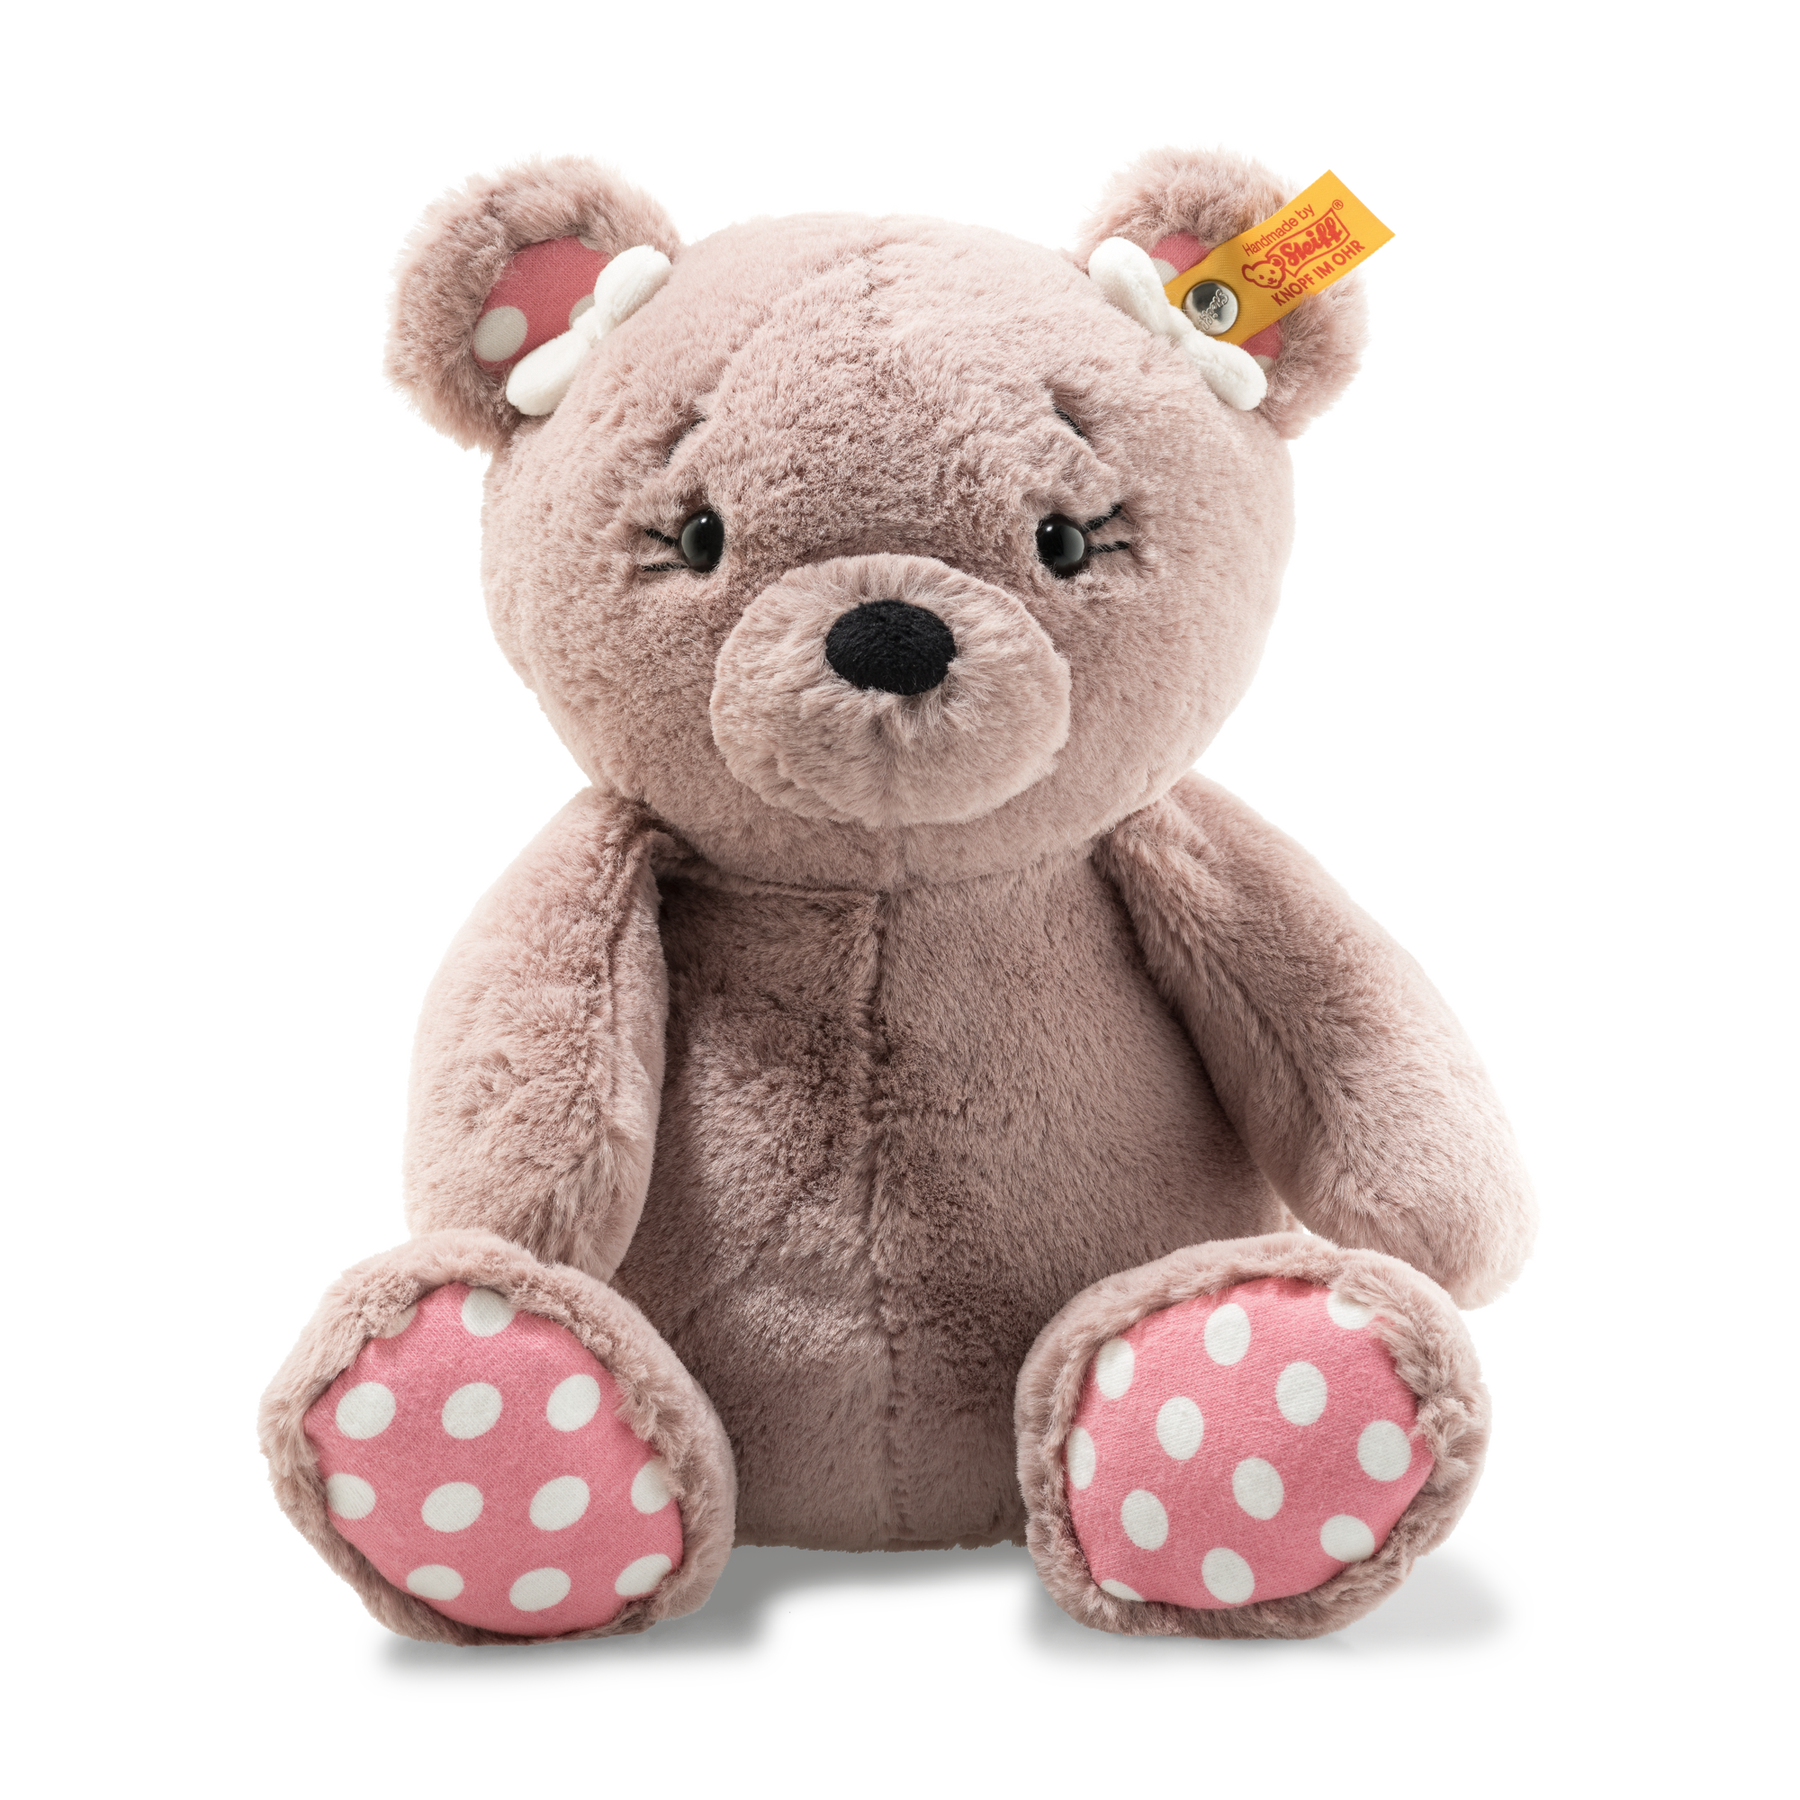 Soft Cuddly Friends ours Teddy Beatrice